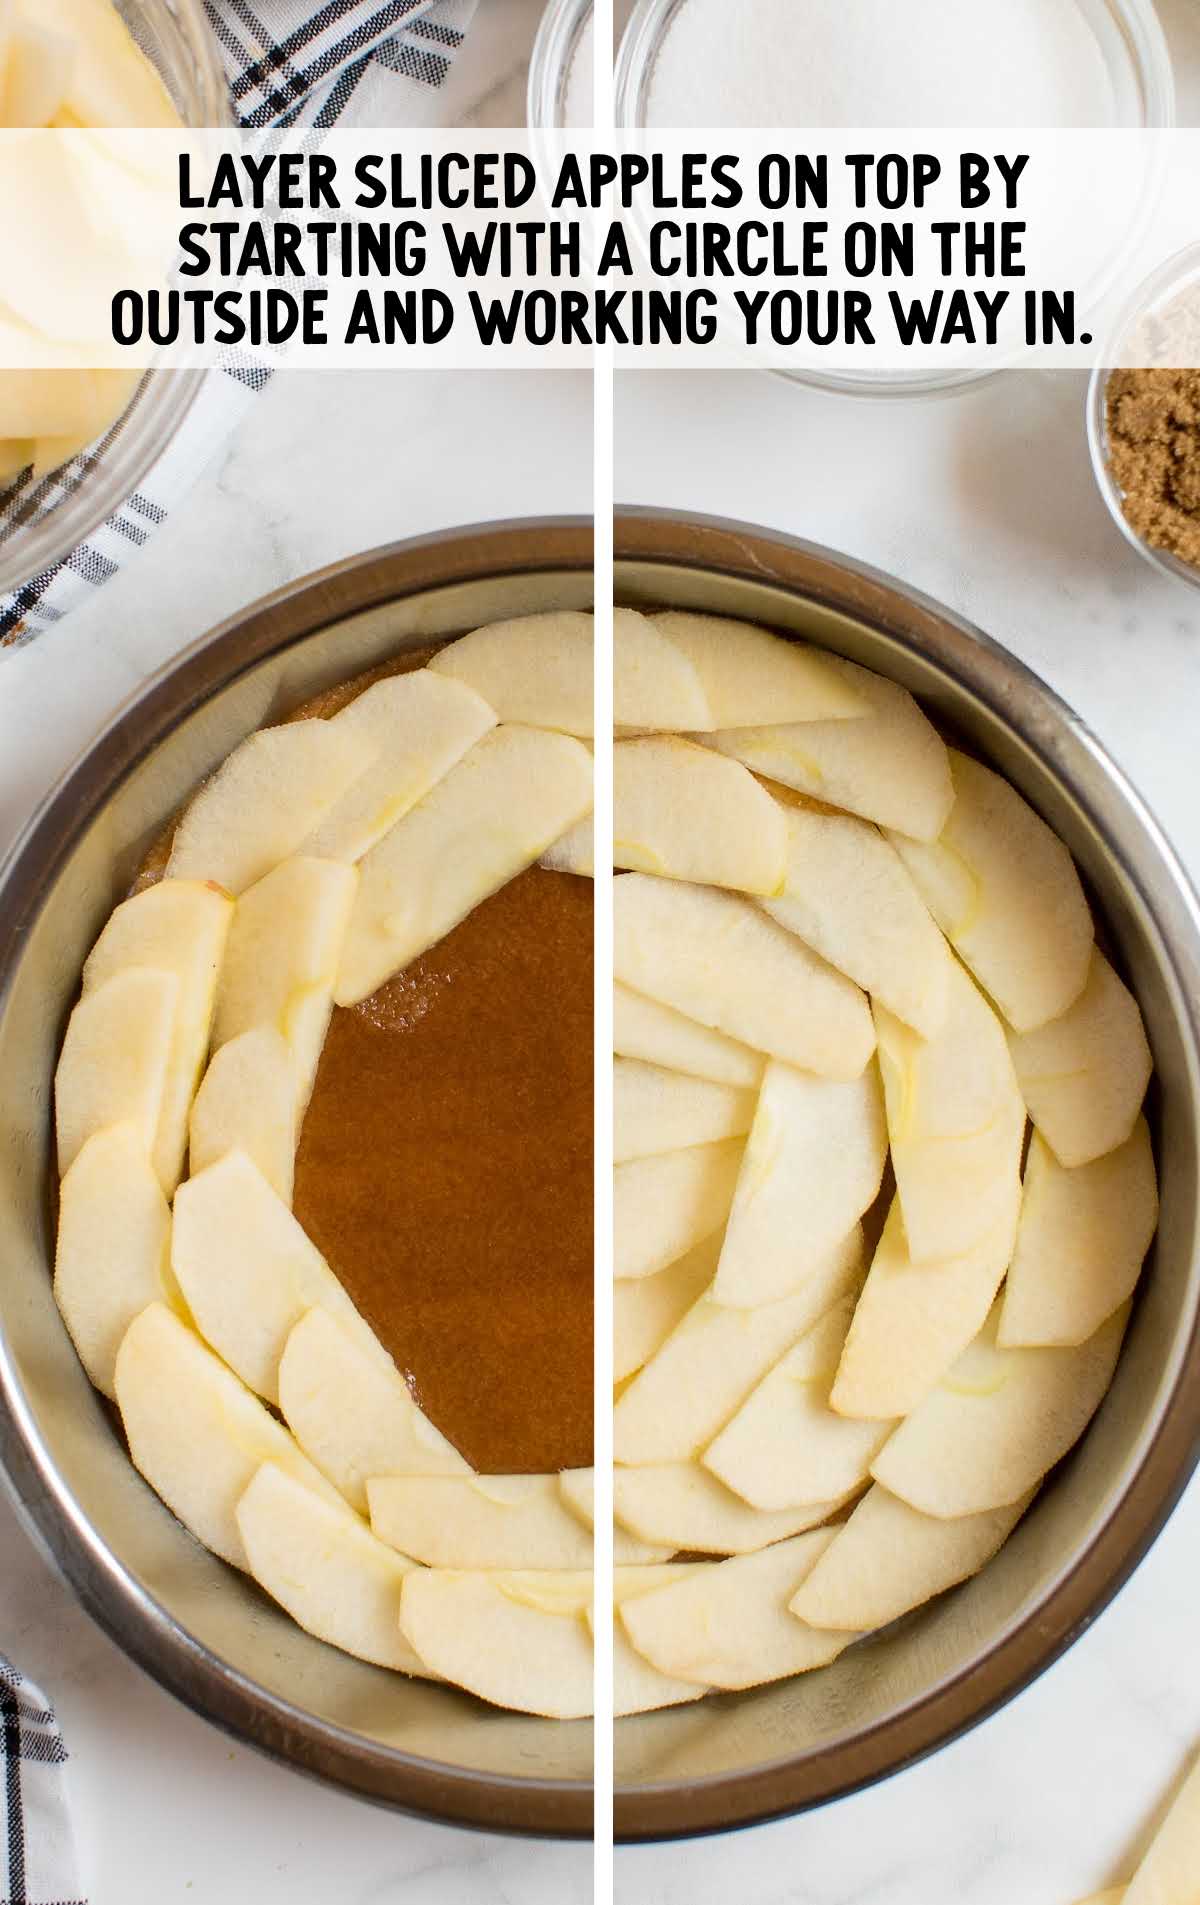 sliced apples laid on top of sugar mixture in a cake pan